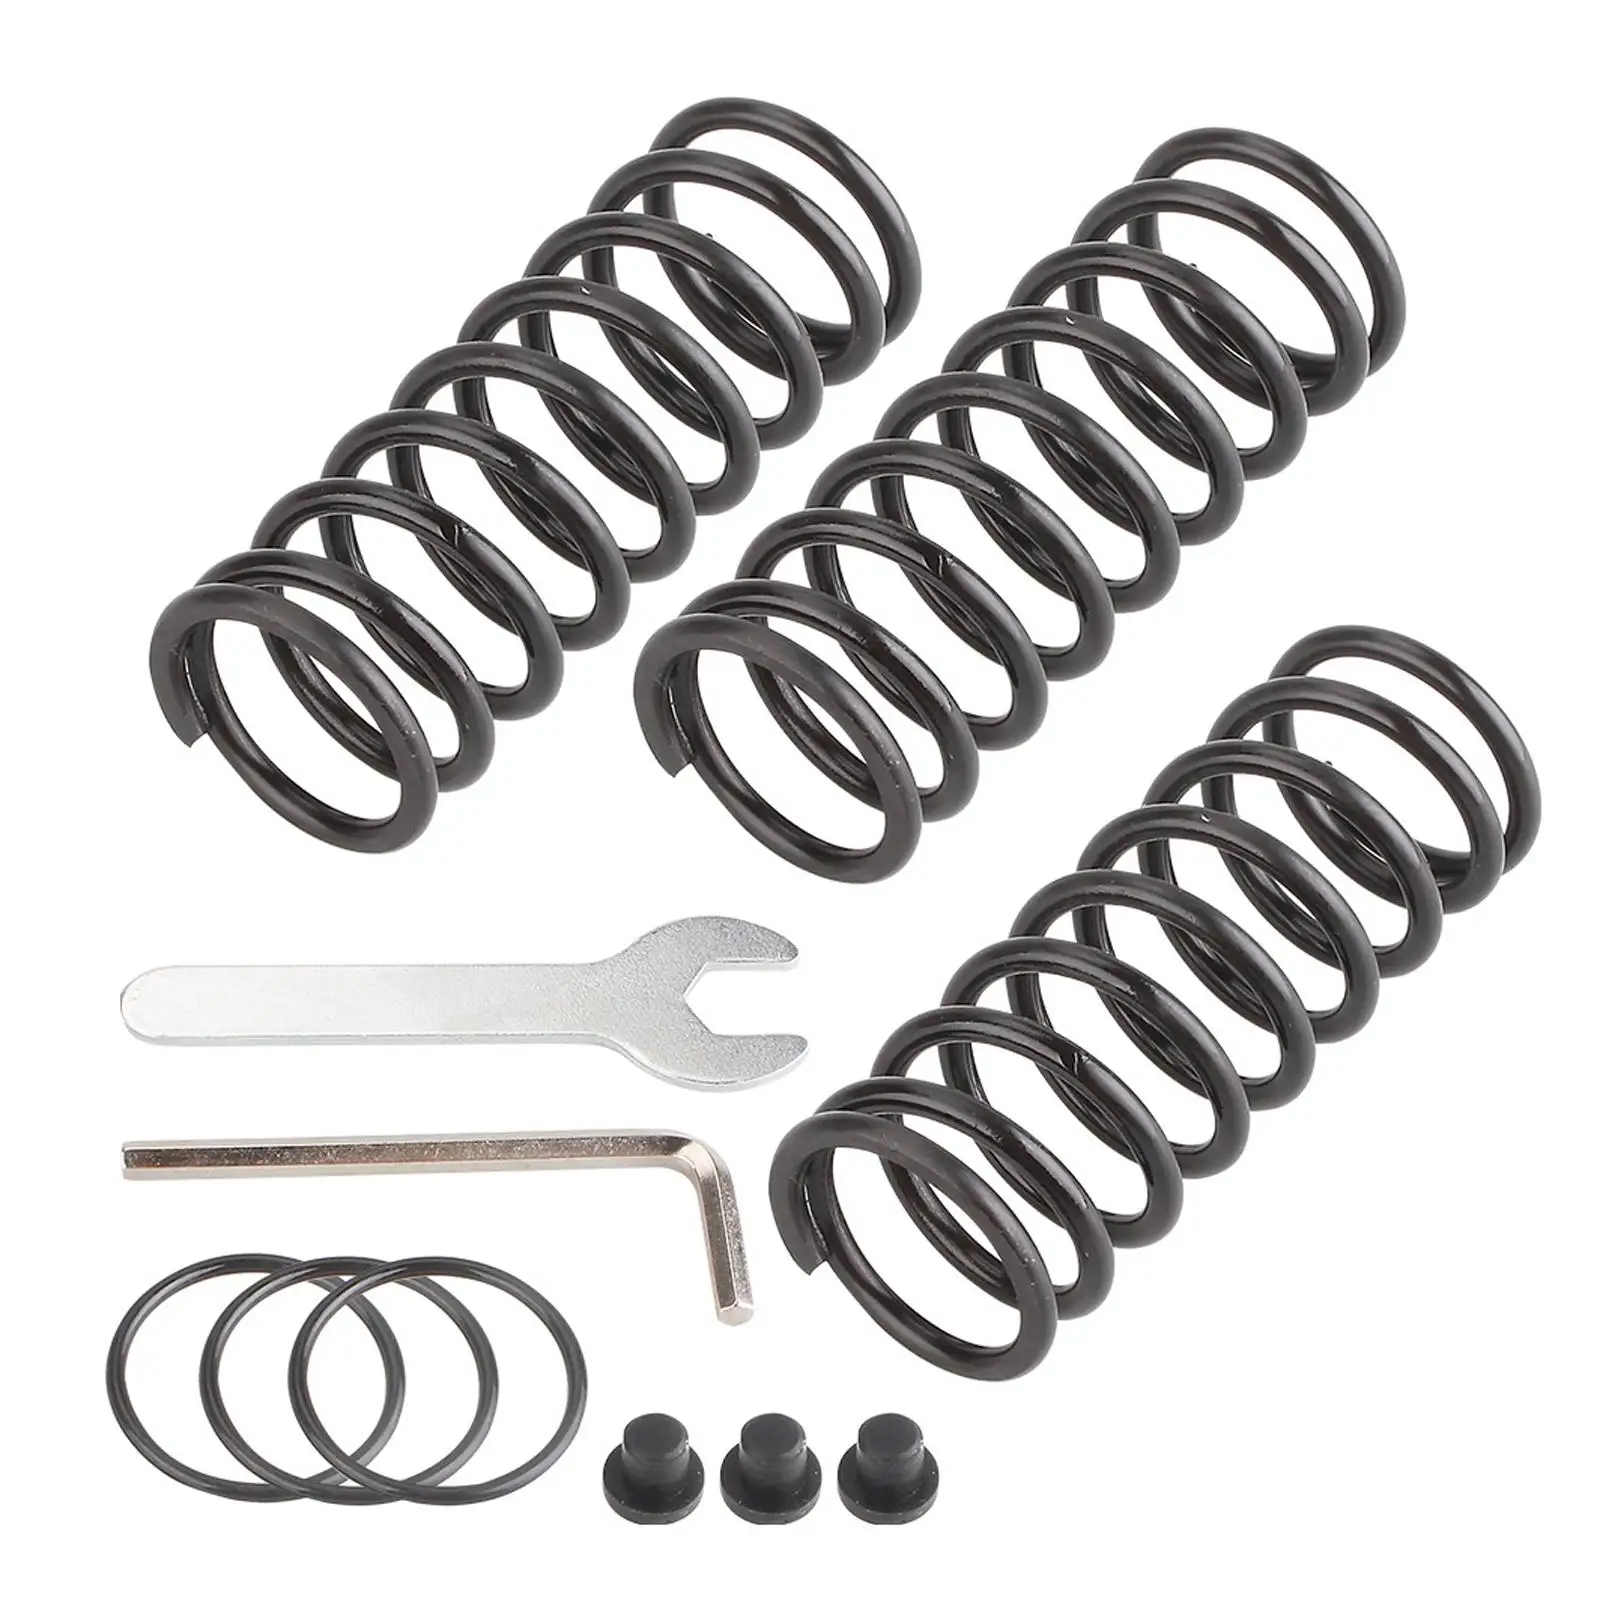 3Pcs Pedal Spring Kit for G27 G29 G920 Modification Complete Supplies for Racing Wheel